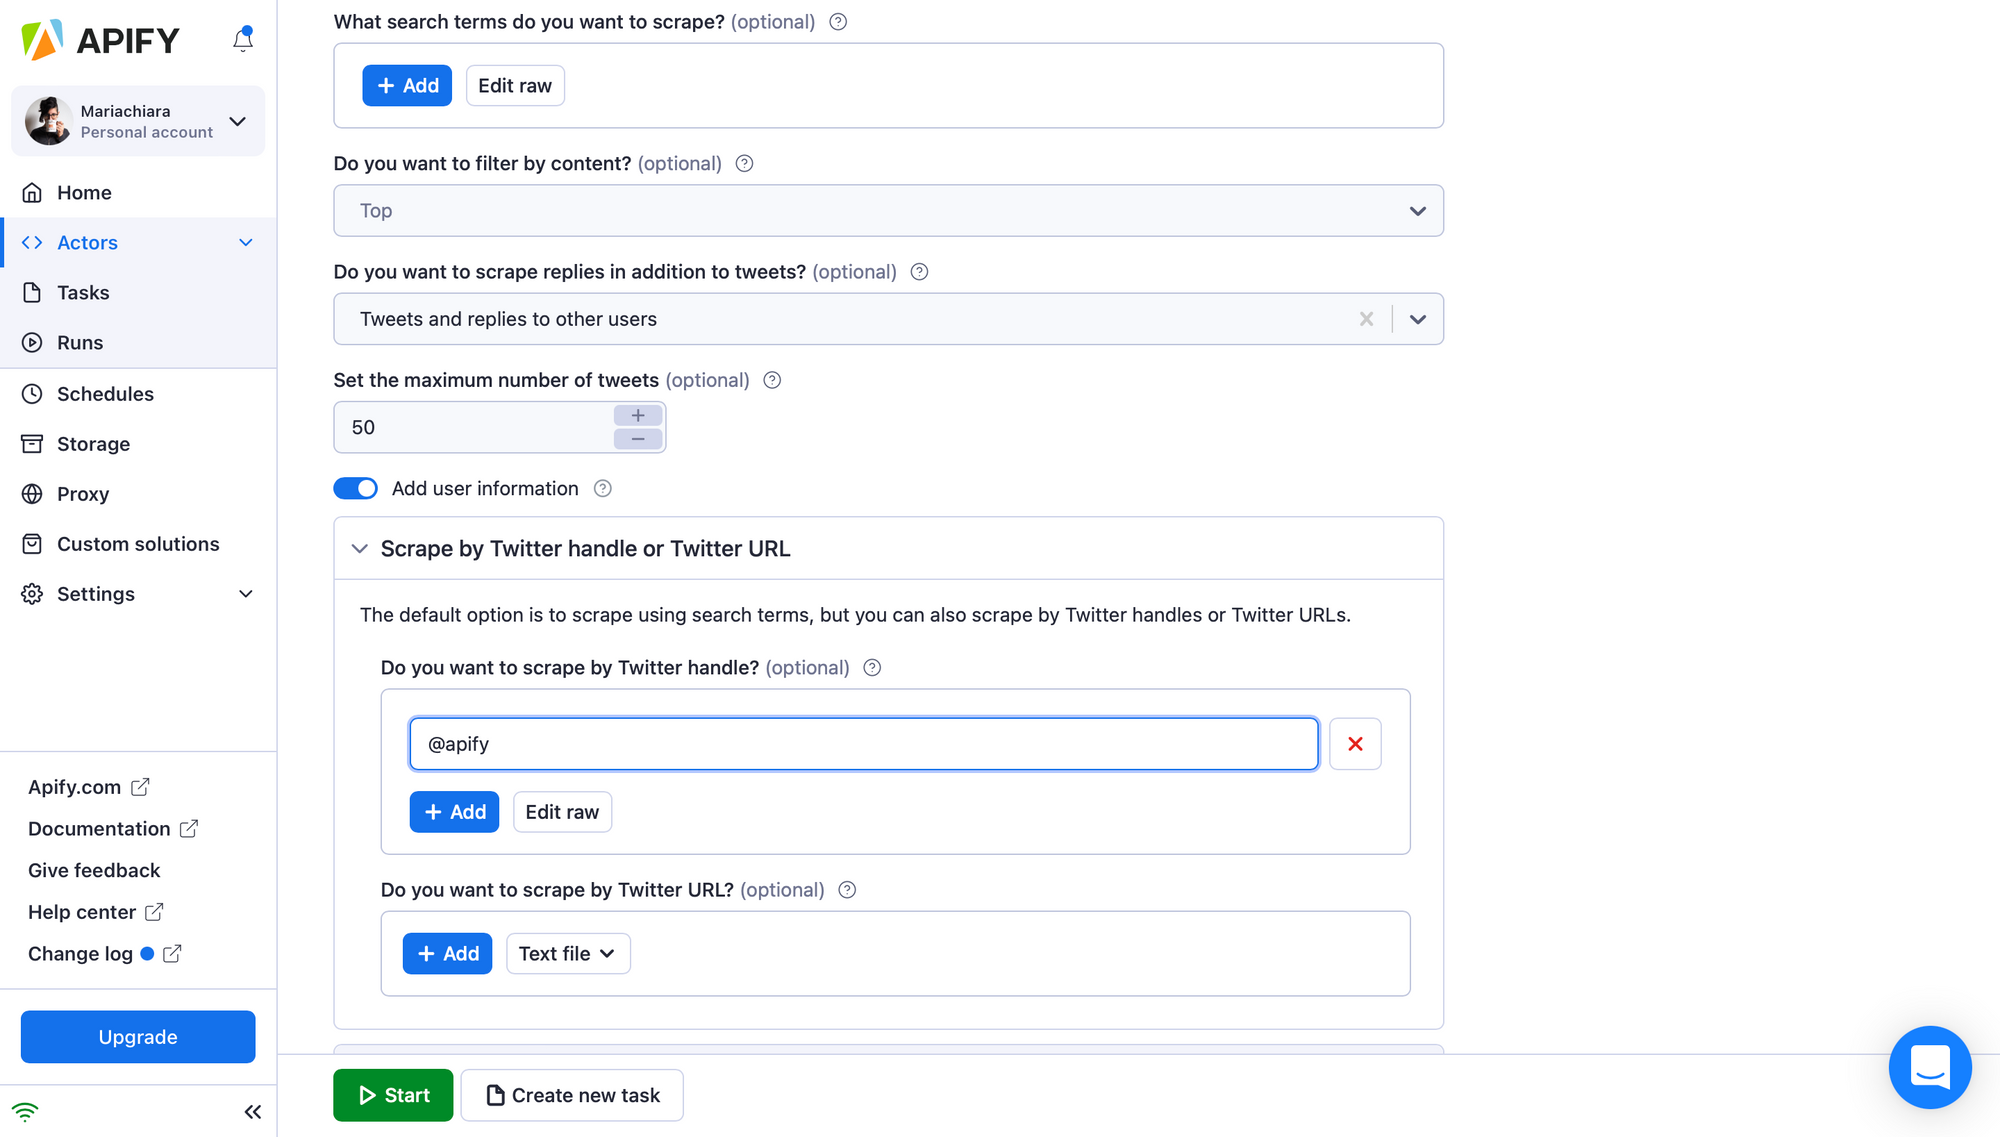 How to scrape data from twitter: In the scraper's input fields, insert the Twitter handle...